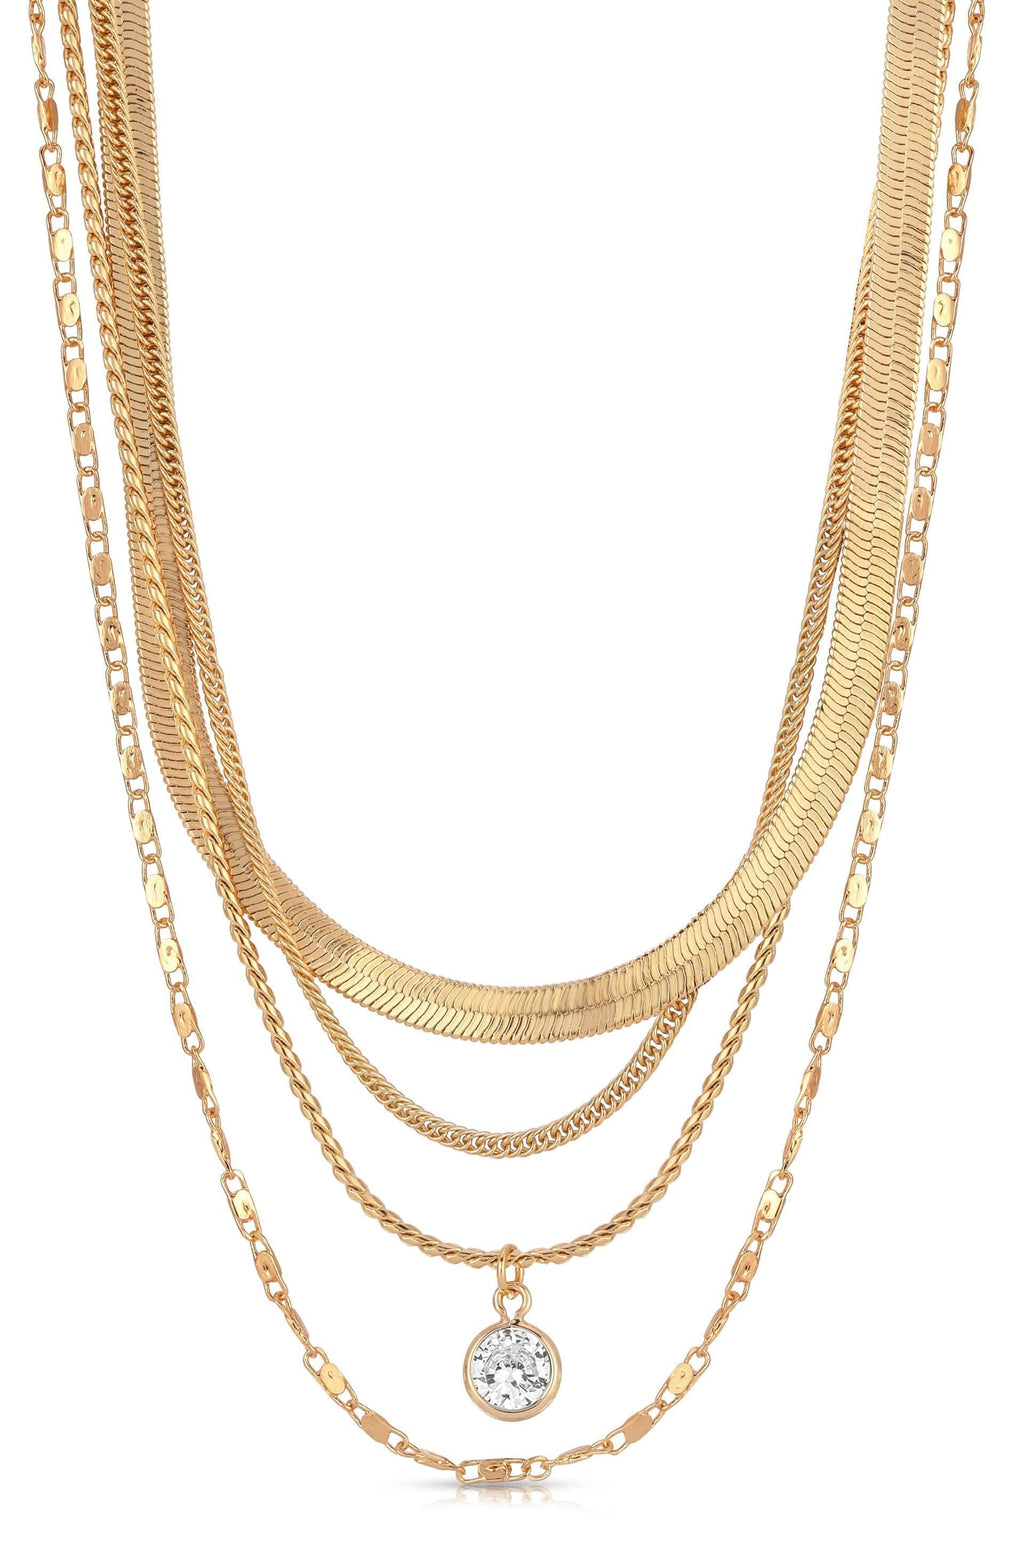 Ettika Necklaces Clear Crystals with 18k Gold Plating / One Size All the Chains 18k Gold Plated Layered Necklace